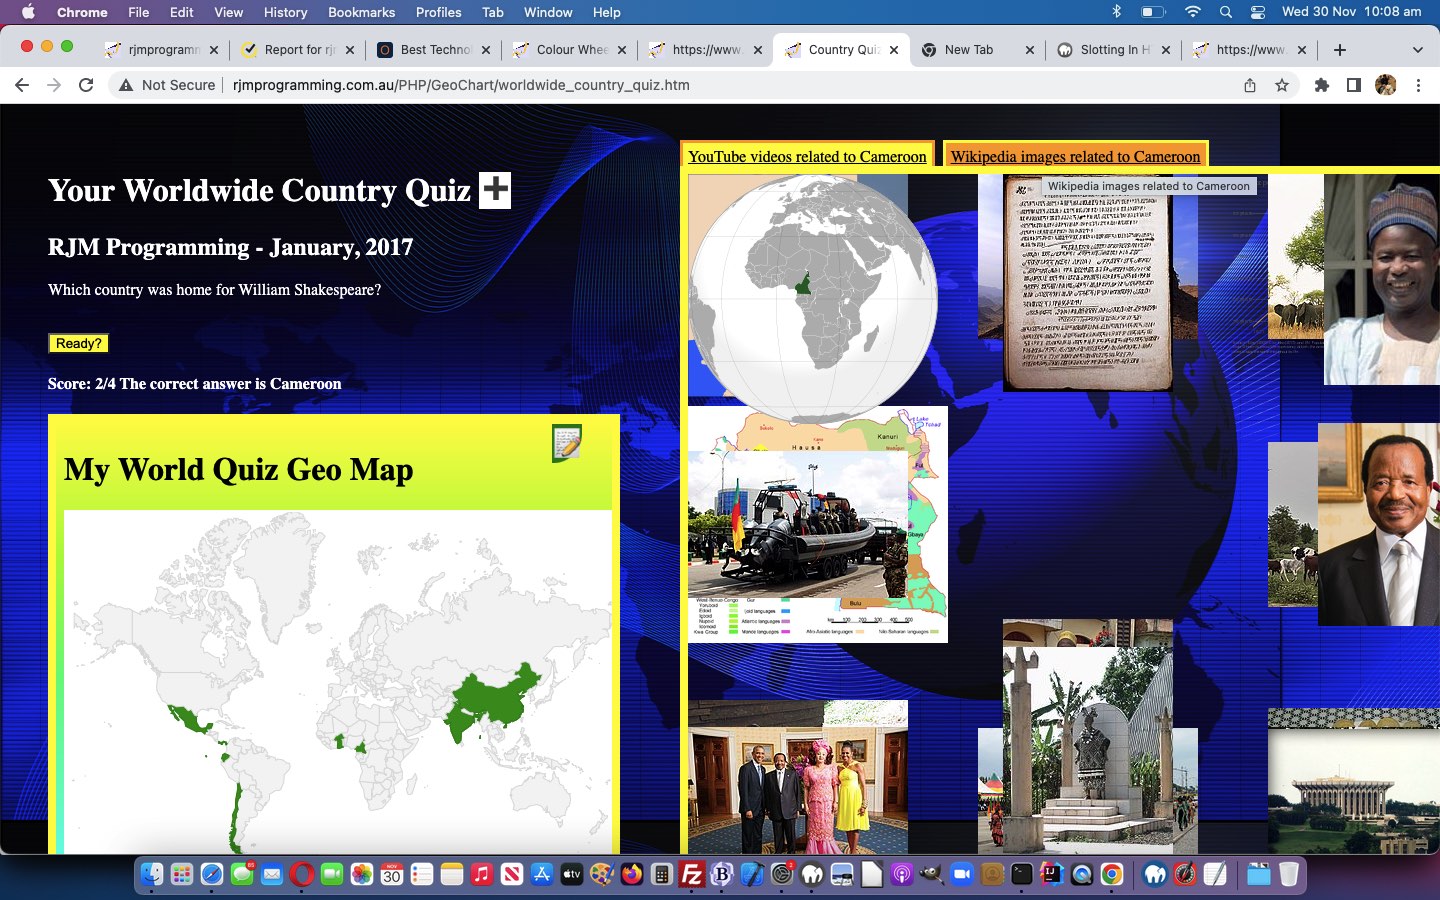 Worldwide Country Quiz Game Wikipedia Images Tutorial